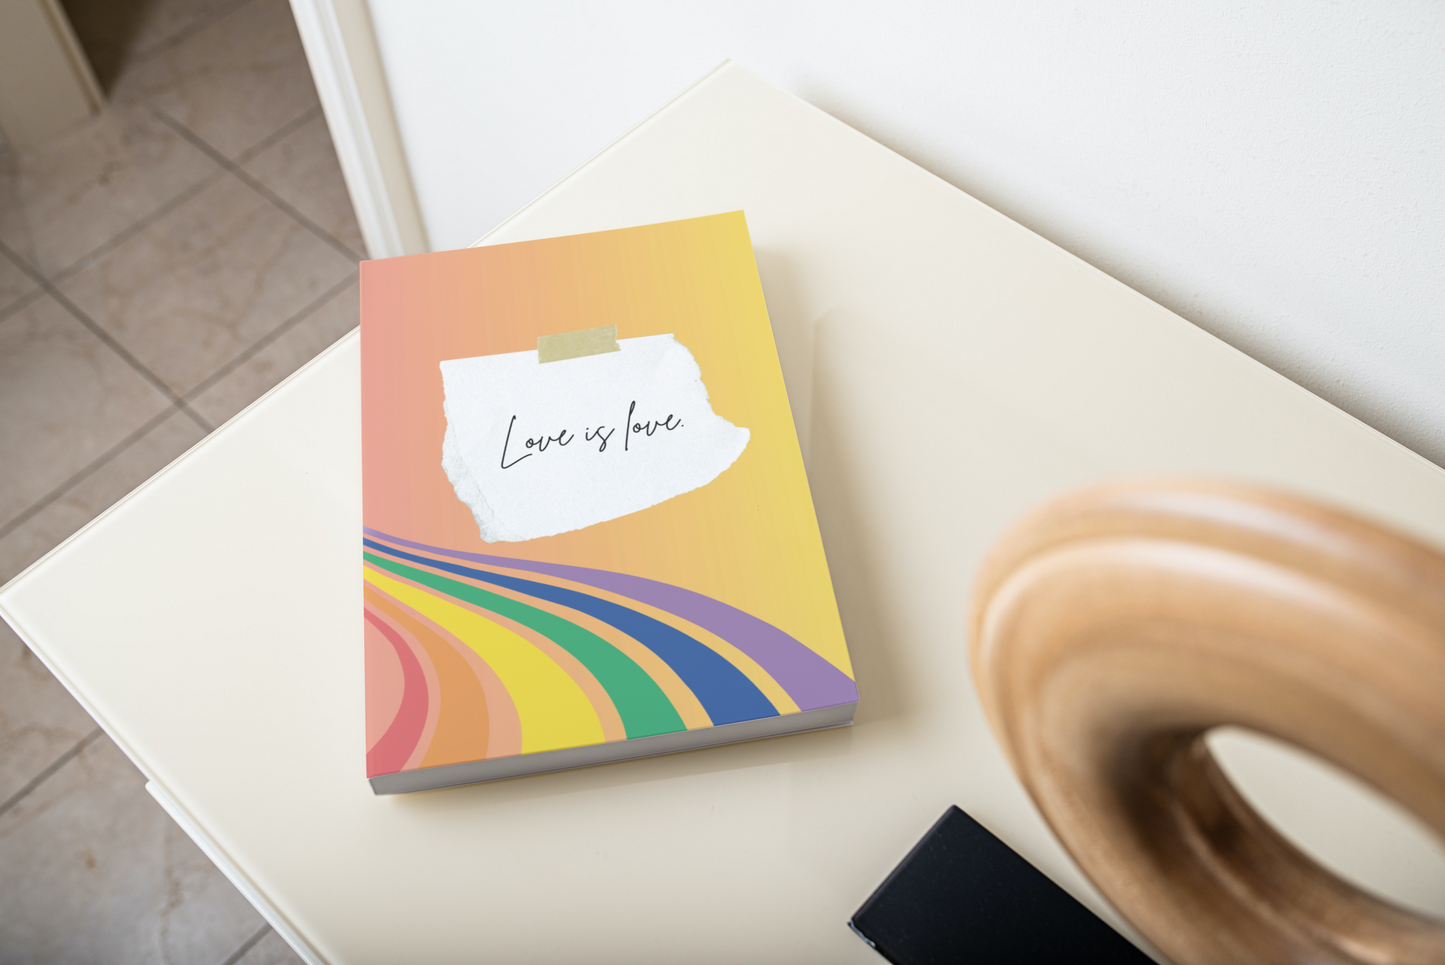 Love Is Love | Softcover Journal Notebook with Lined Pages, 6"x9"